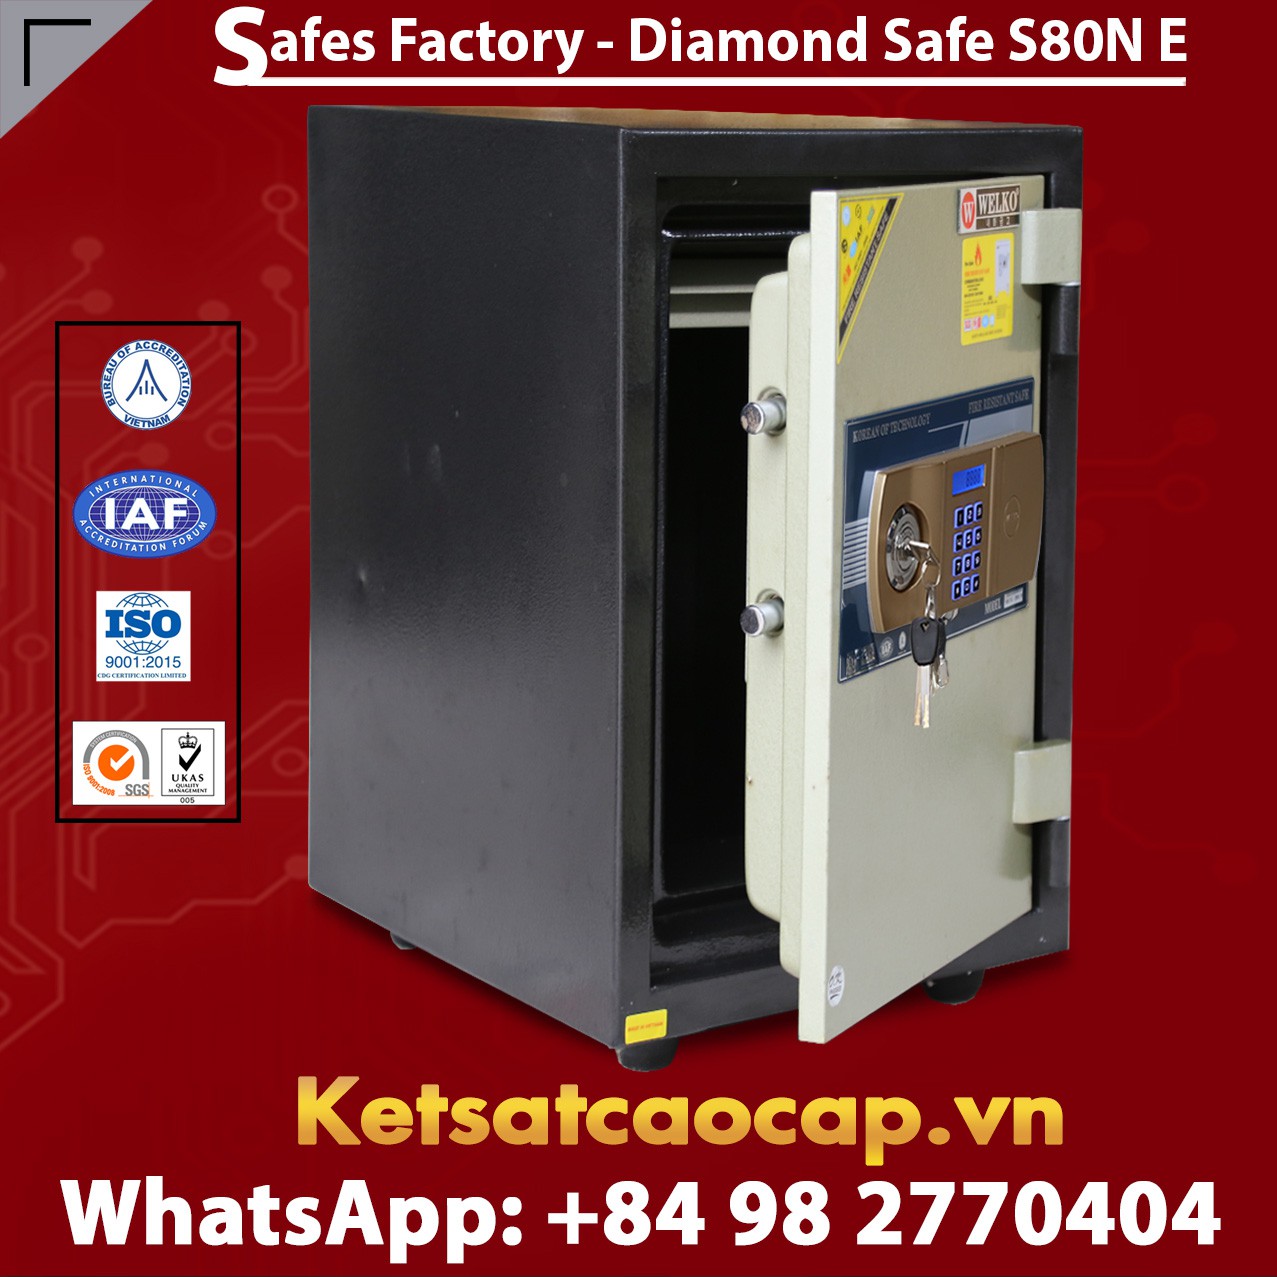 Office Safes High Quality Factory Price best seller